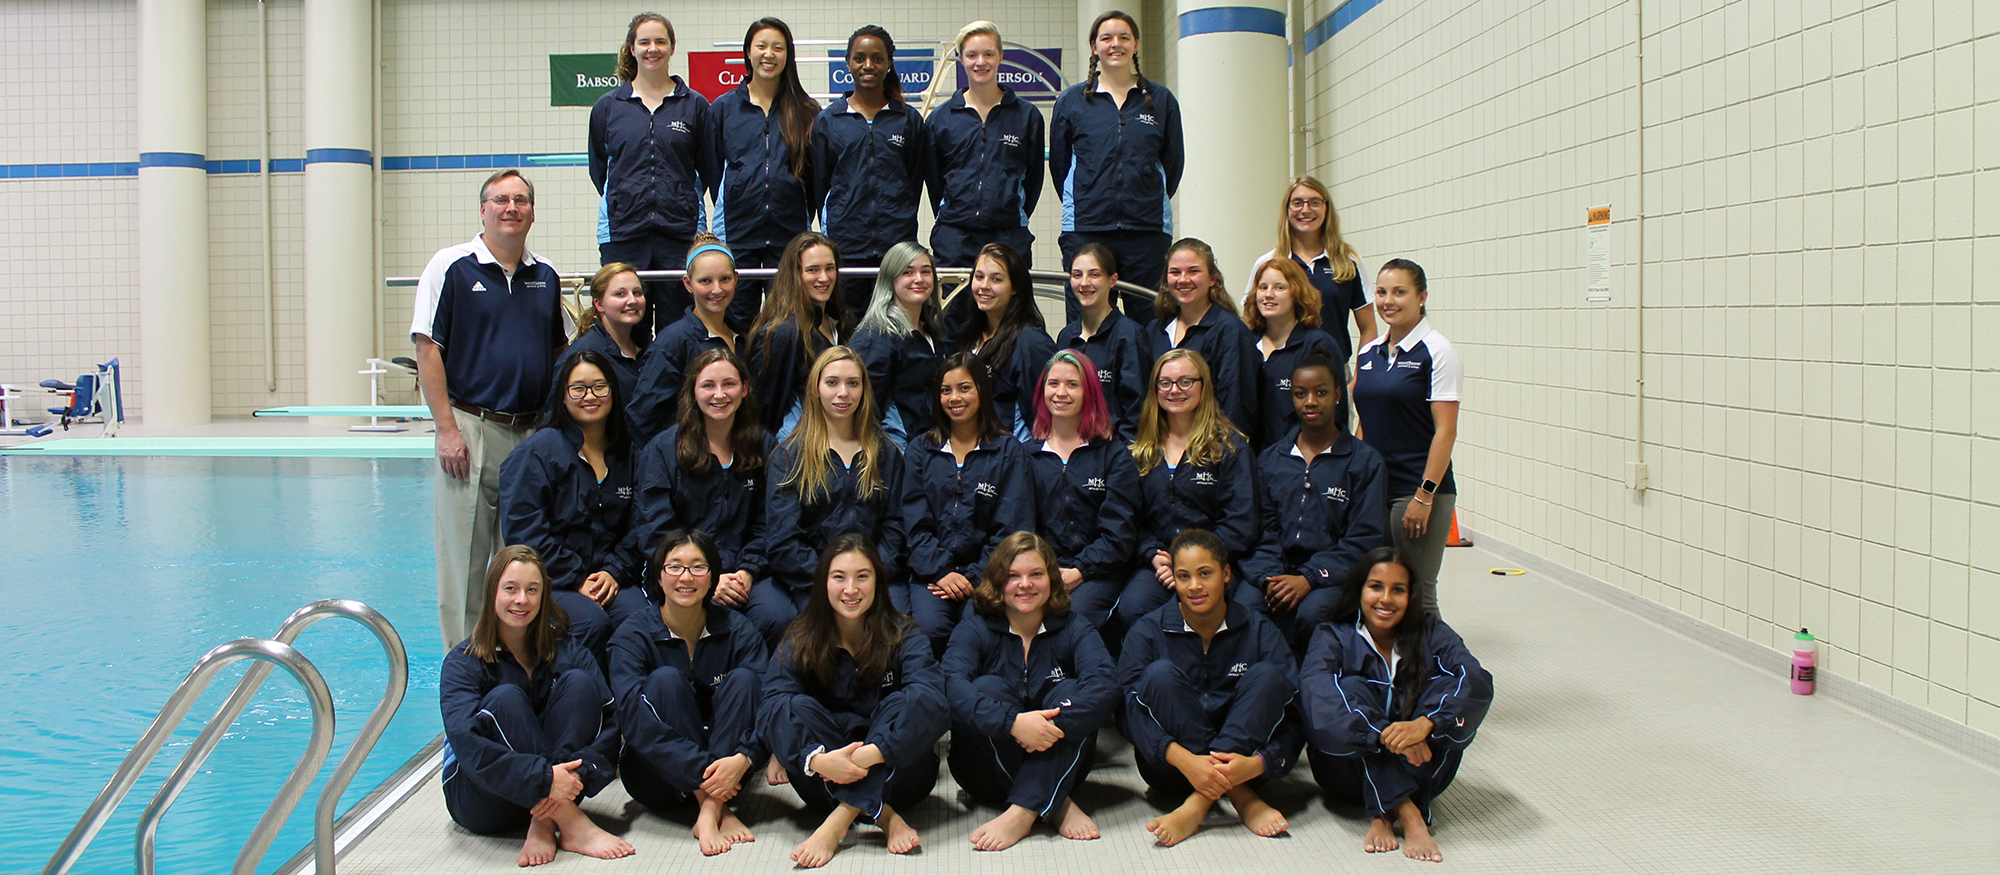 Team photo of the 2017-18 Lyons Swimming & Diving Team.